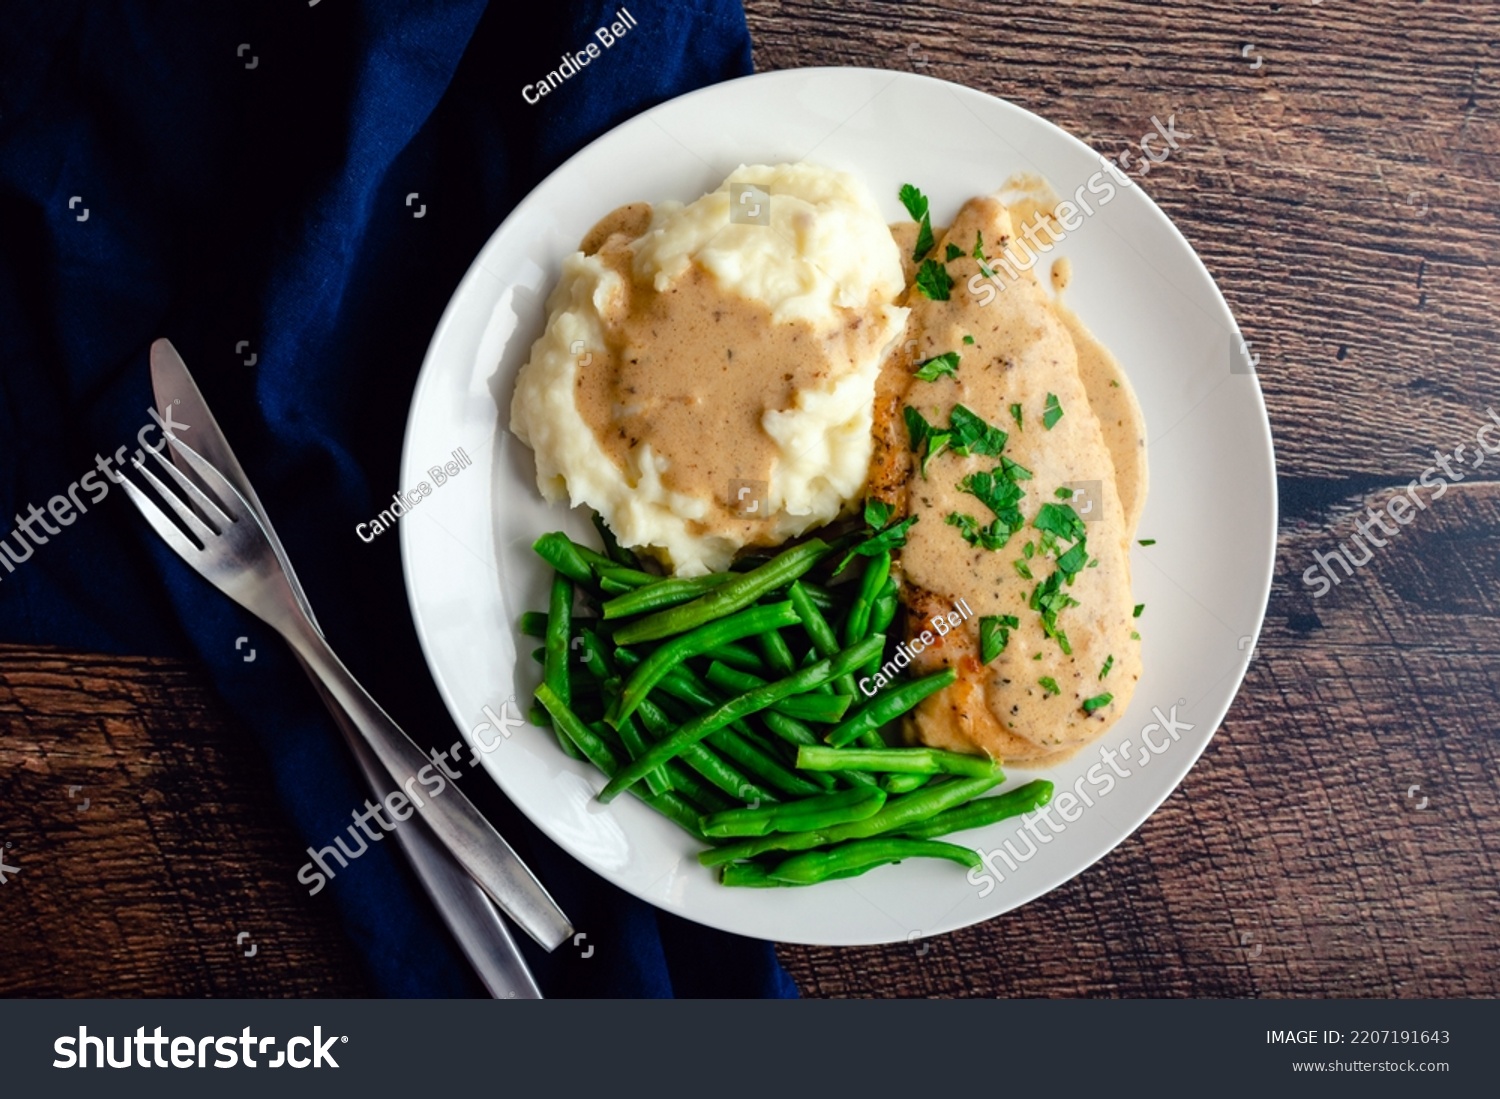 Chicken Breast Served with Green Beans, Mashed Potatoes, and Garlic Gravy: Chicken cutlet topped with creamy garlic sauce served with vegetables #2207191643